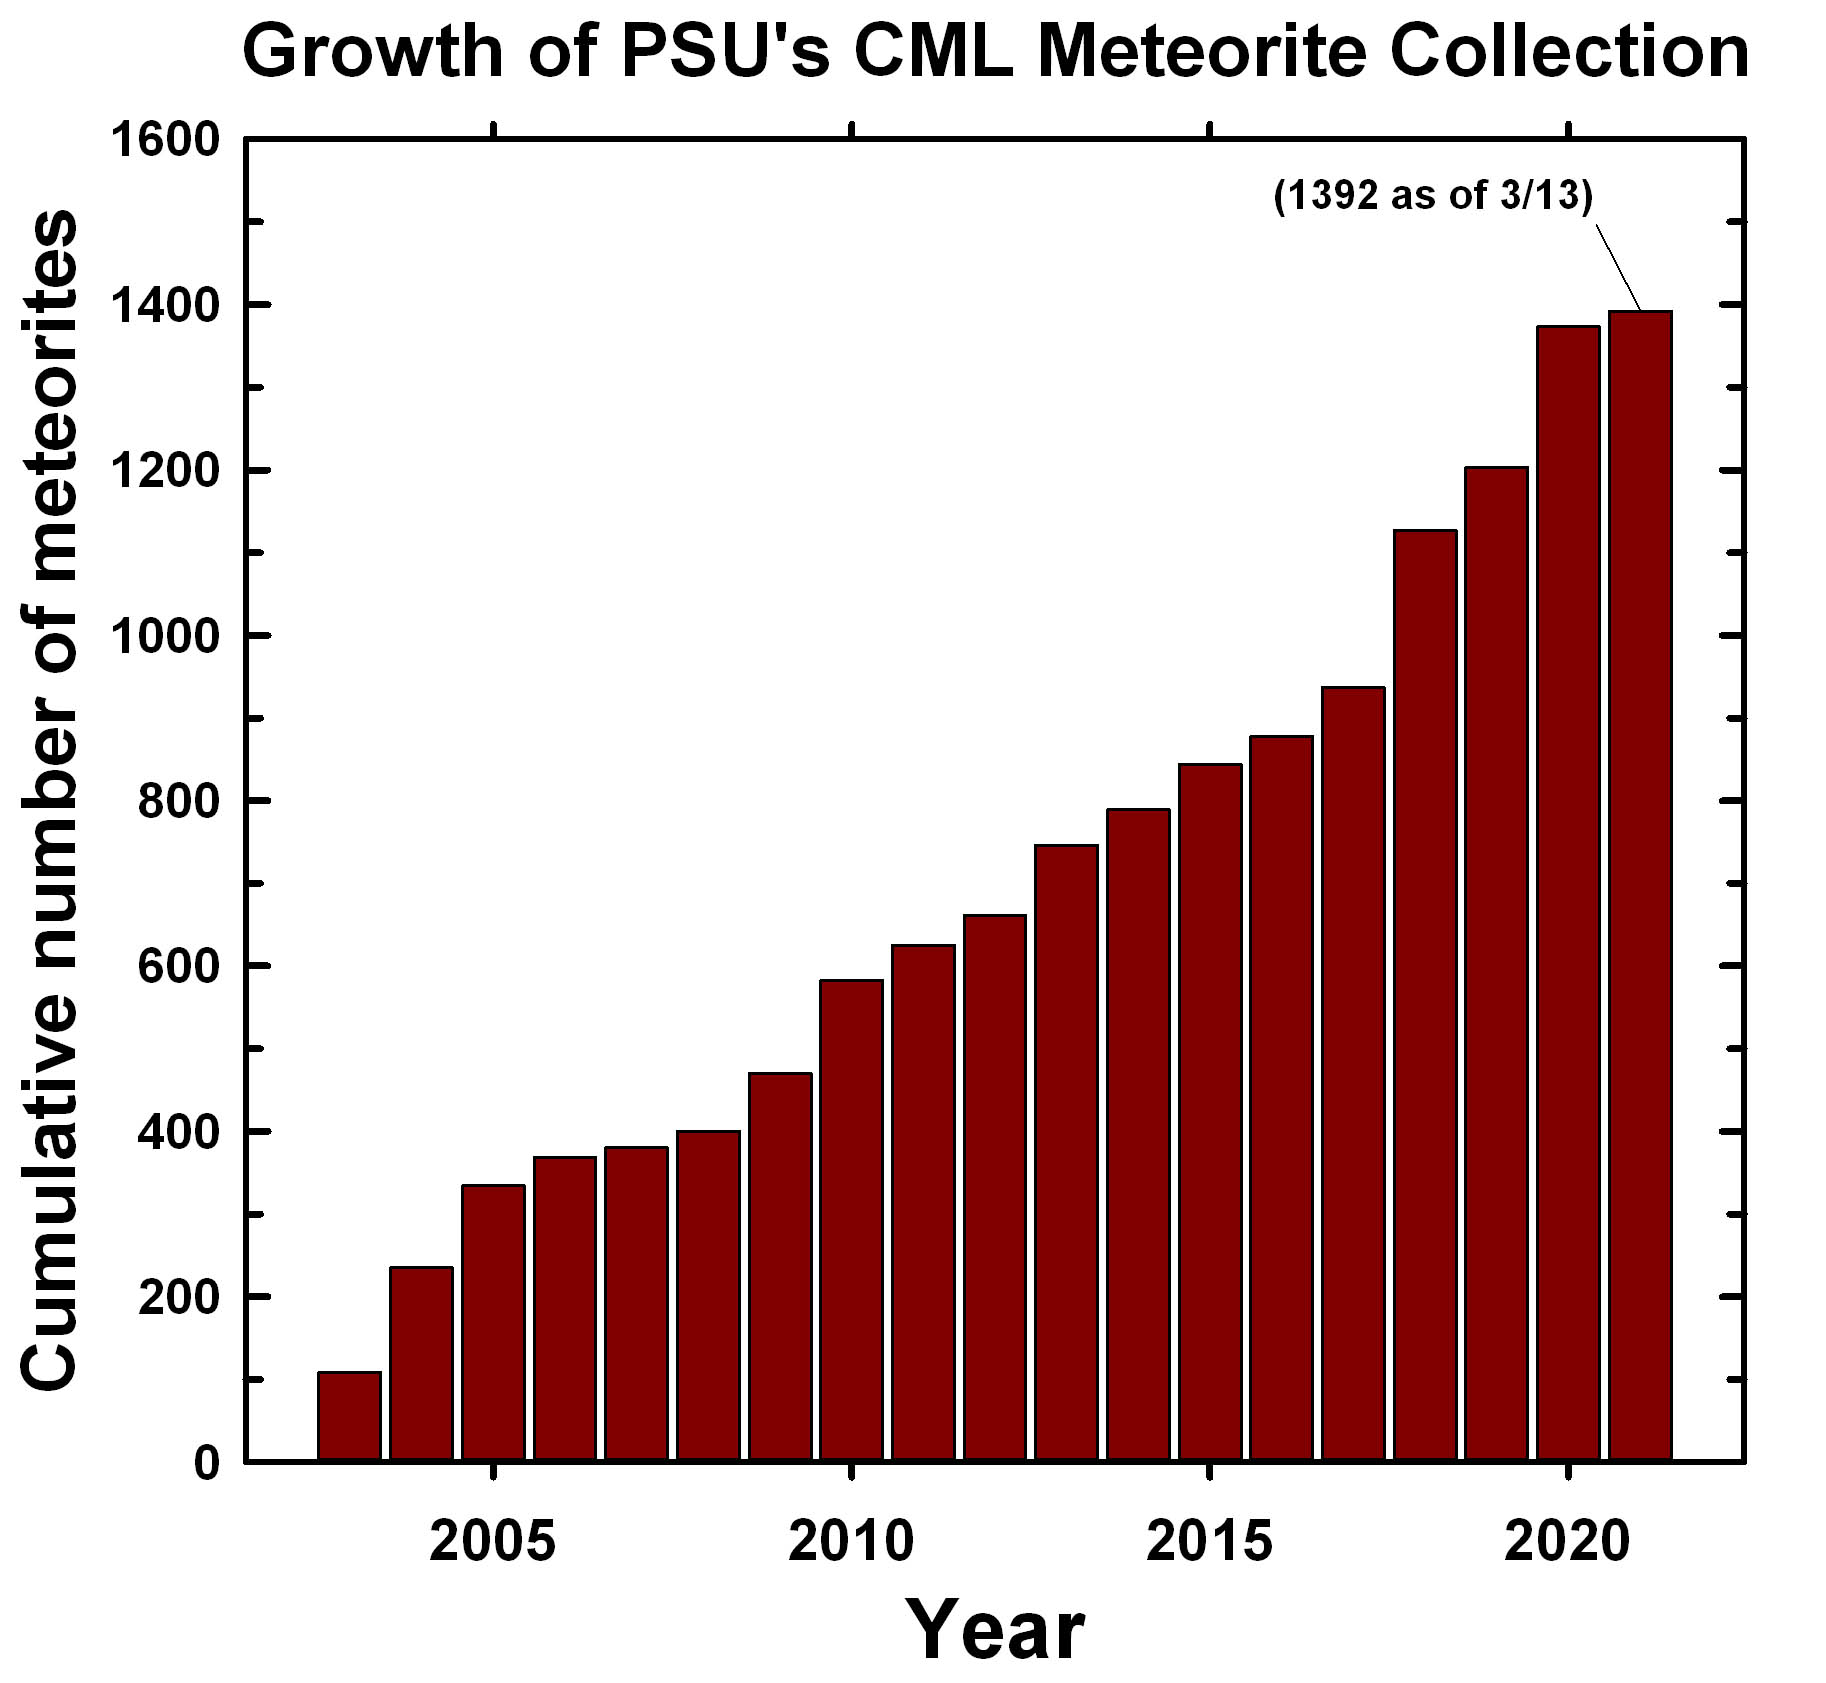 Growth of CML meteorite collection